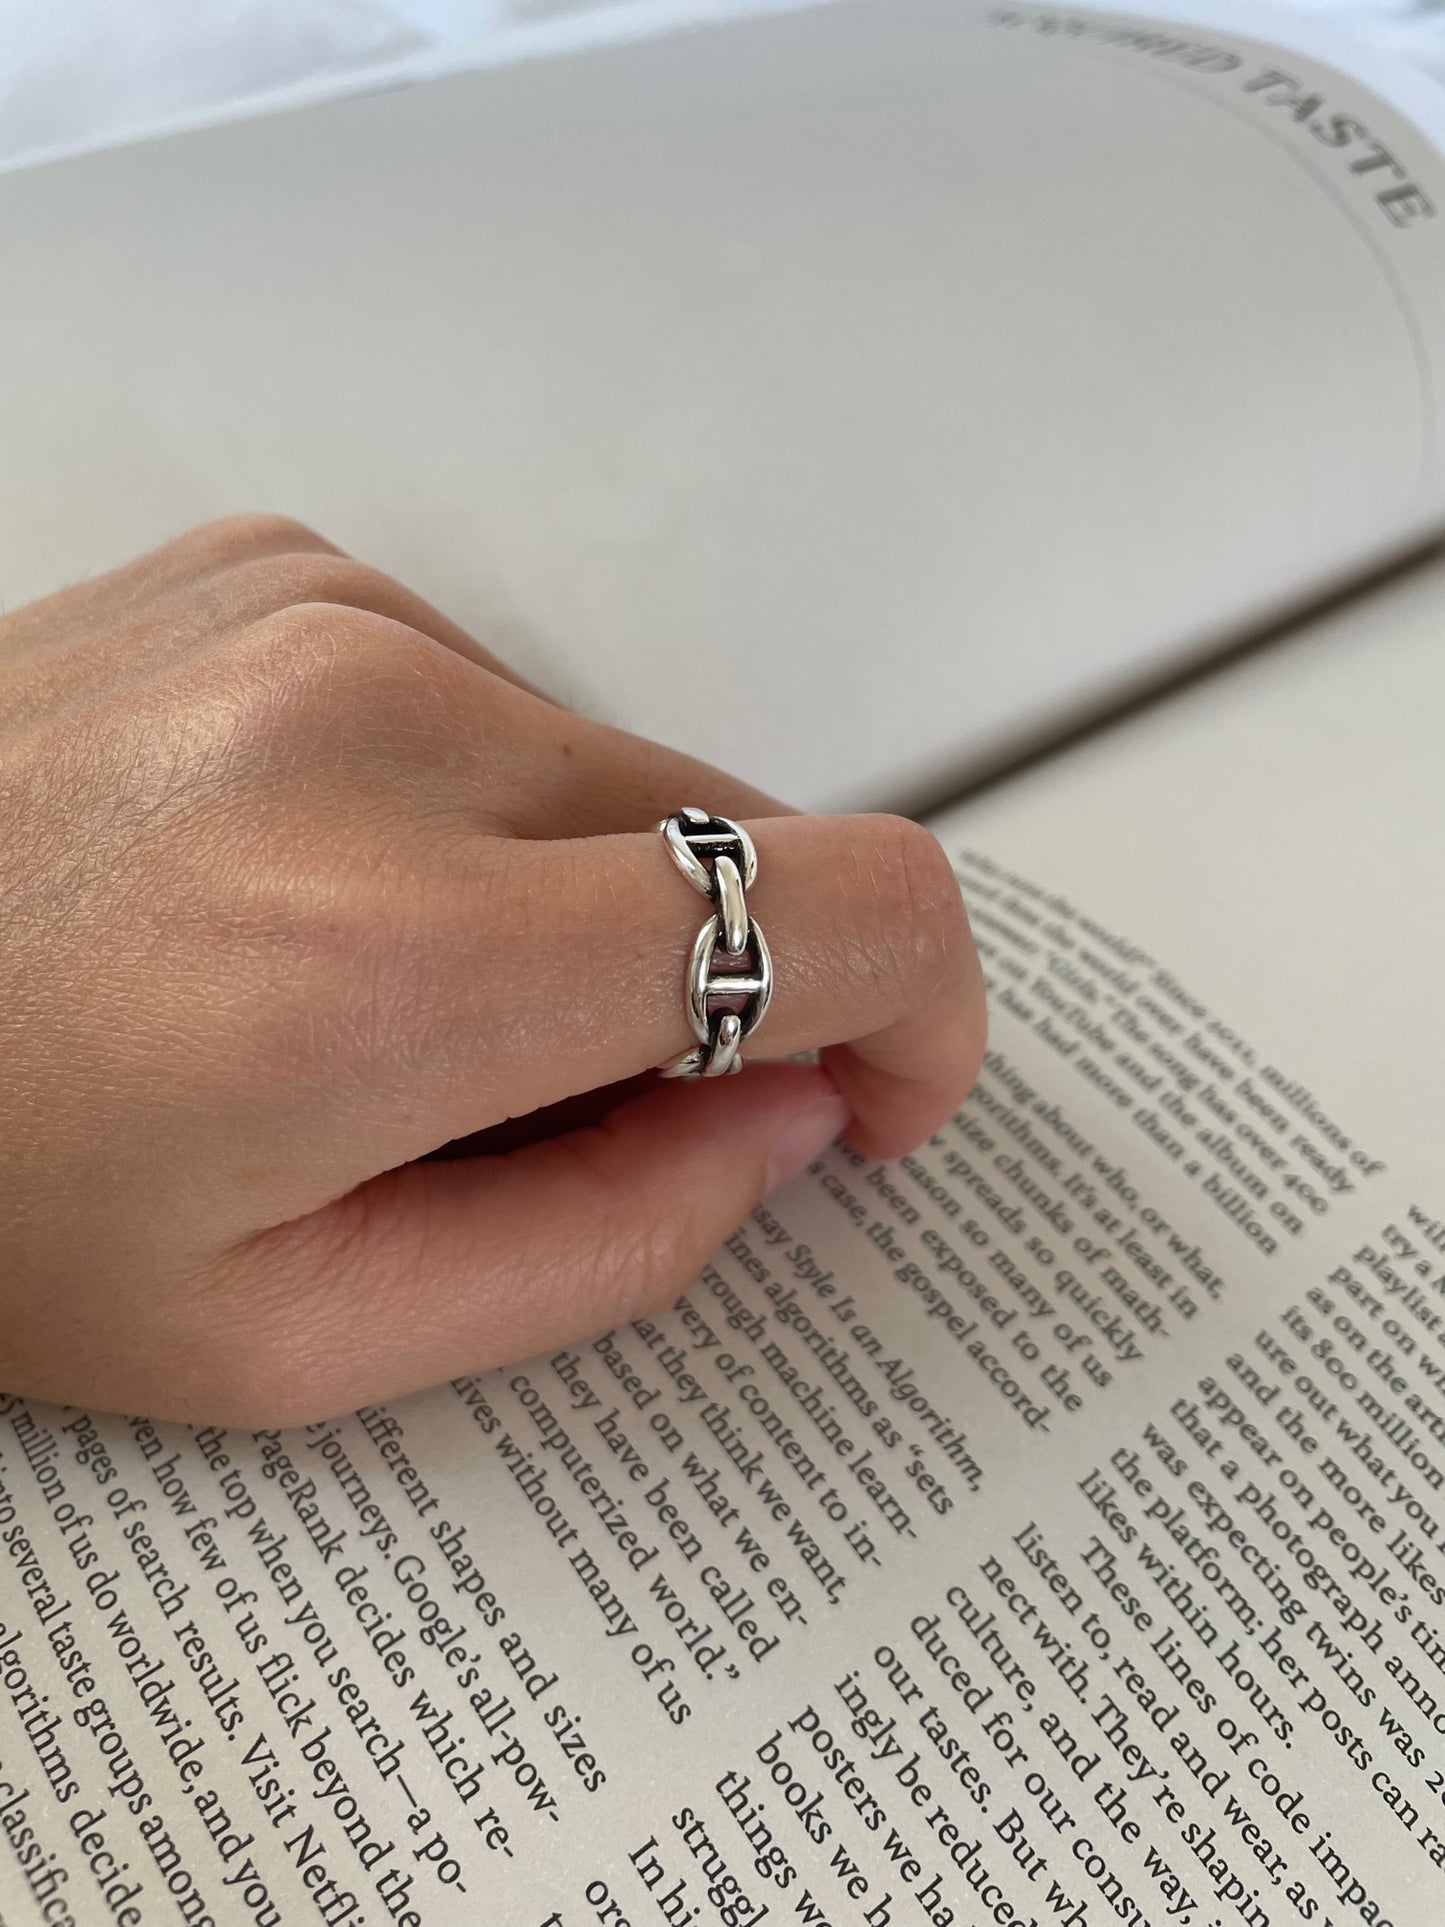 RealSilver♥ 925 Sterling Silver Chain Link Adjustable Ring